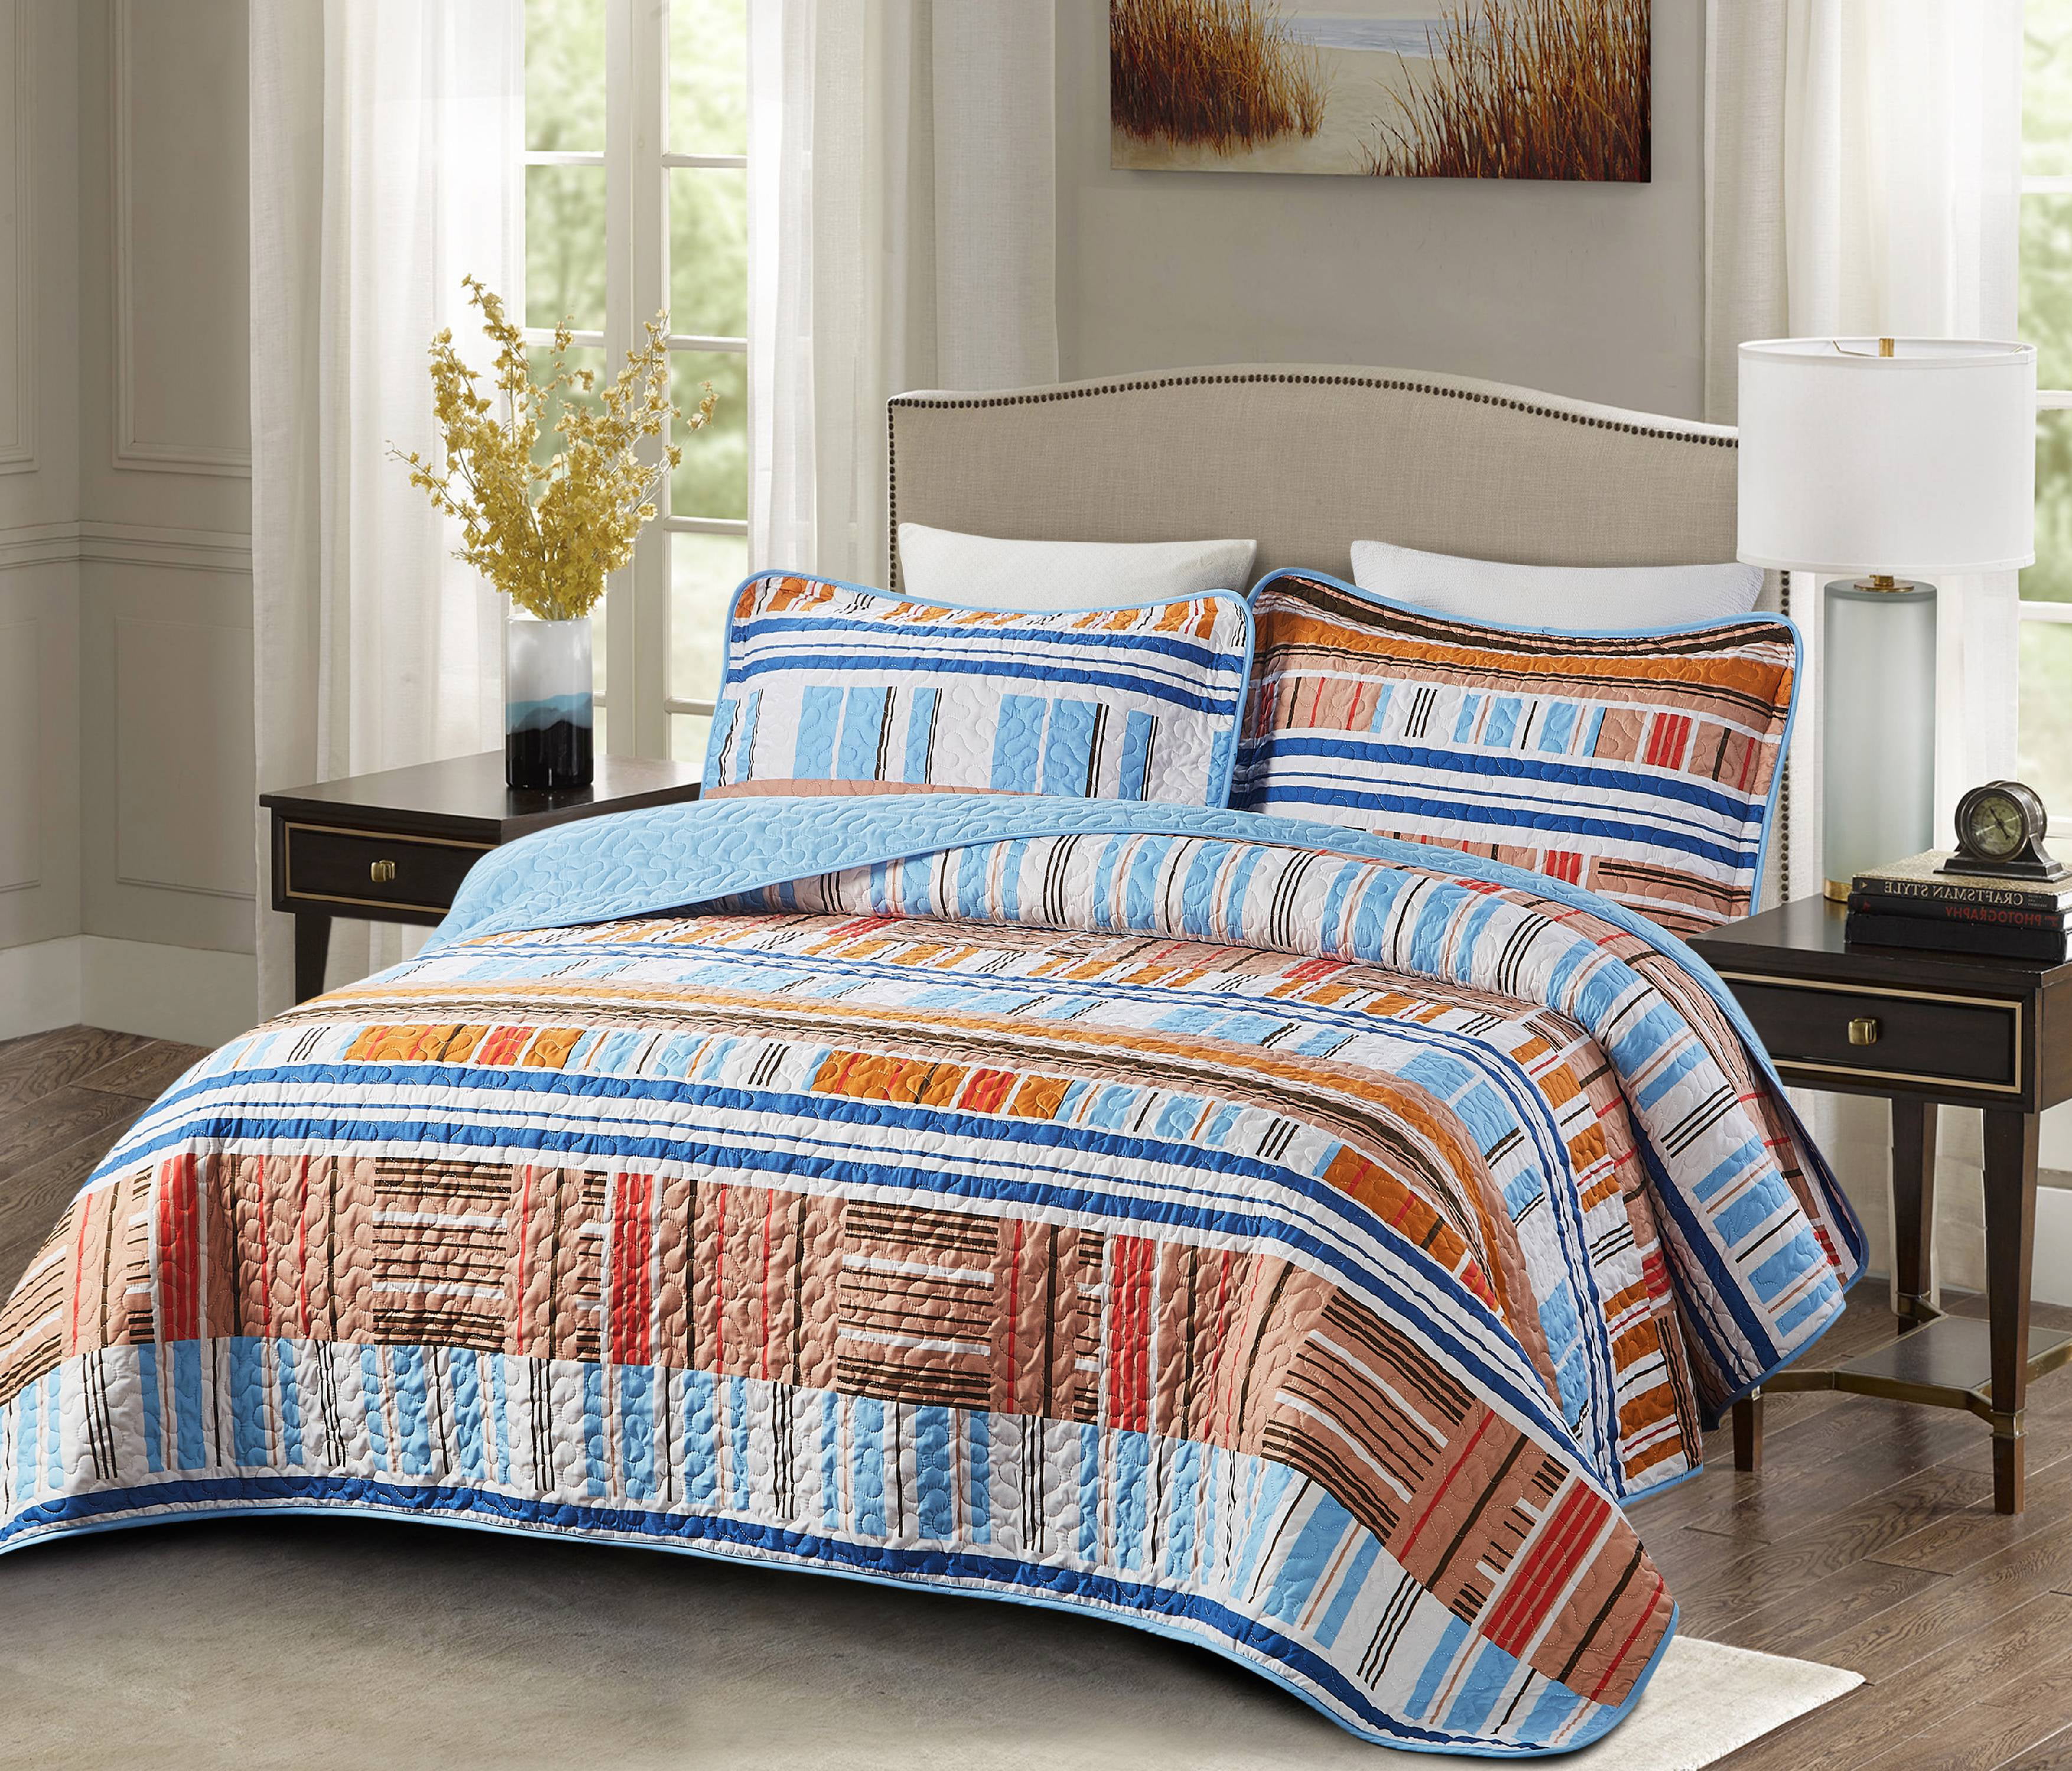 3 Piece Oversized King Quilt Set, Bed Bath And Beyond Oversized King Quilts